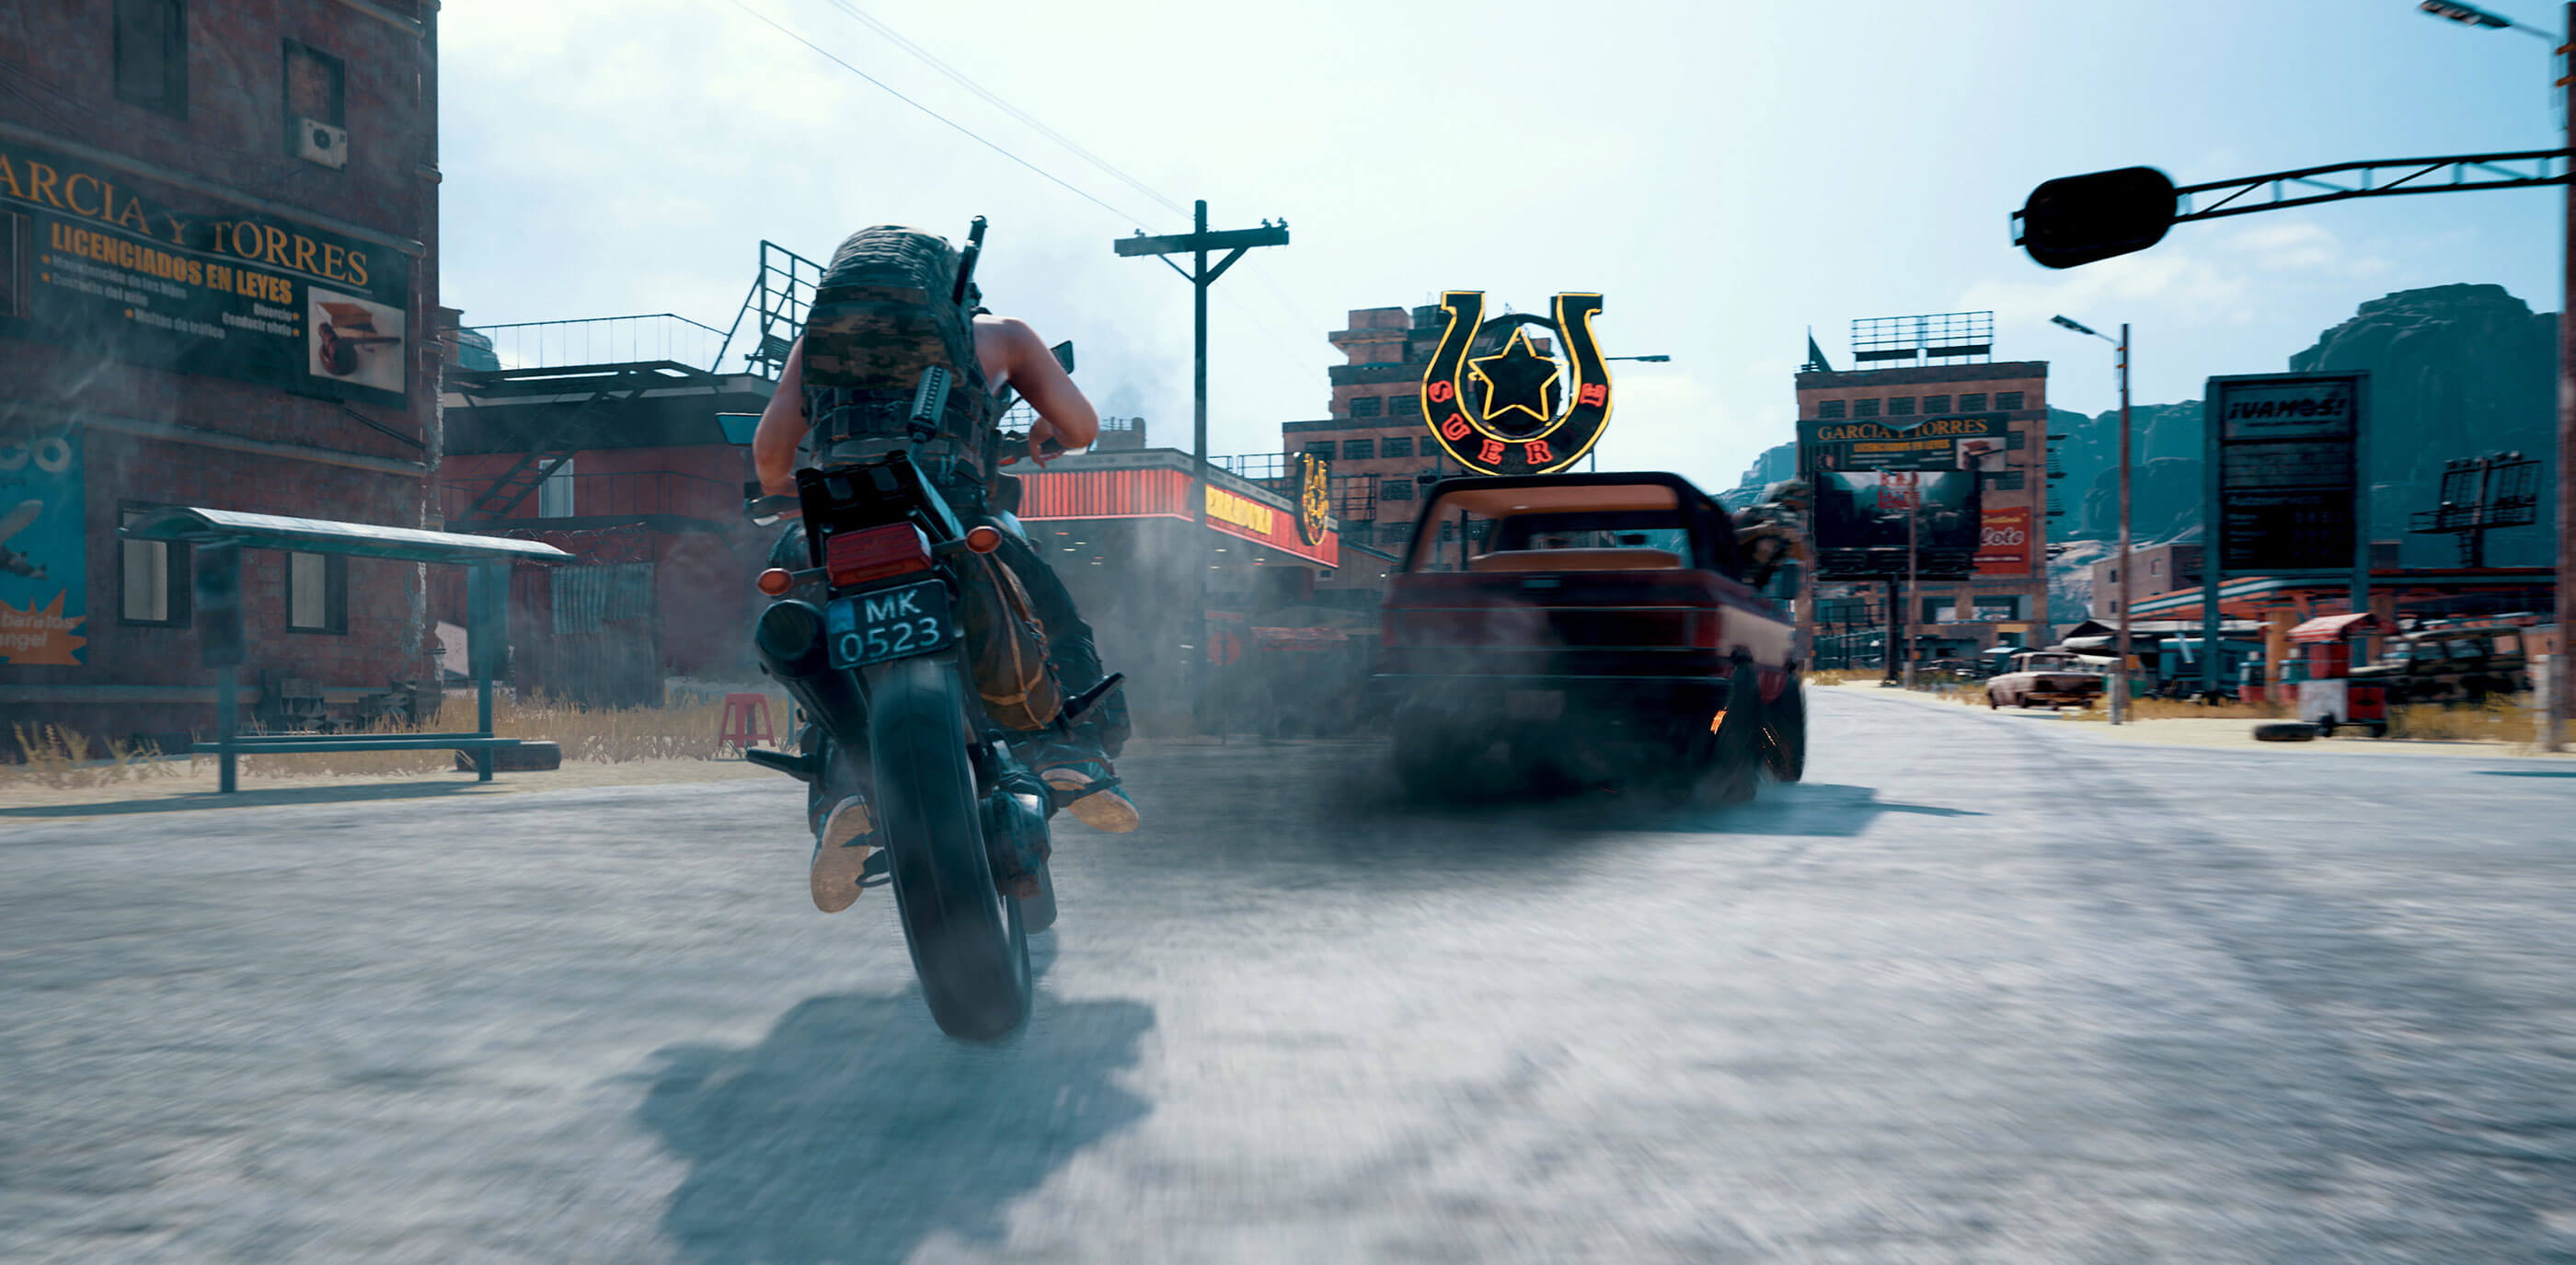 A player on a motorcycle chases a smoking truck down a western themed street